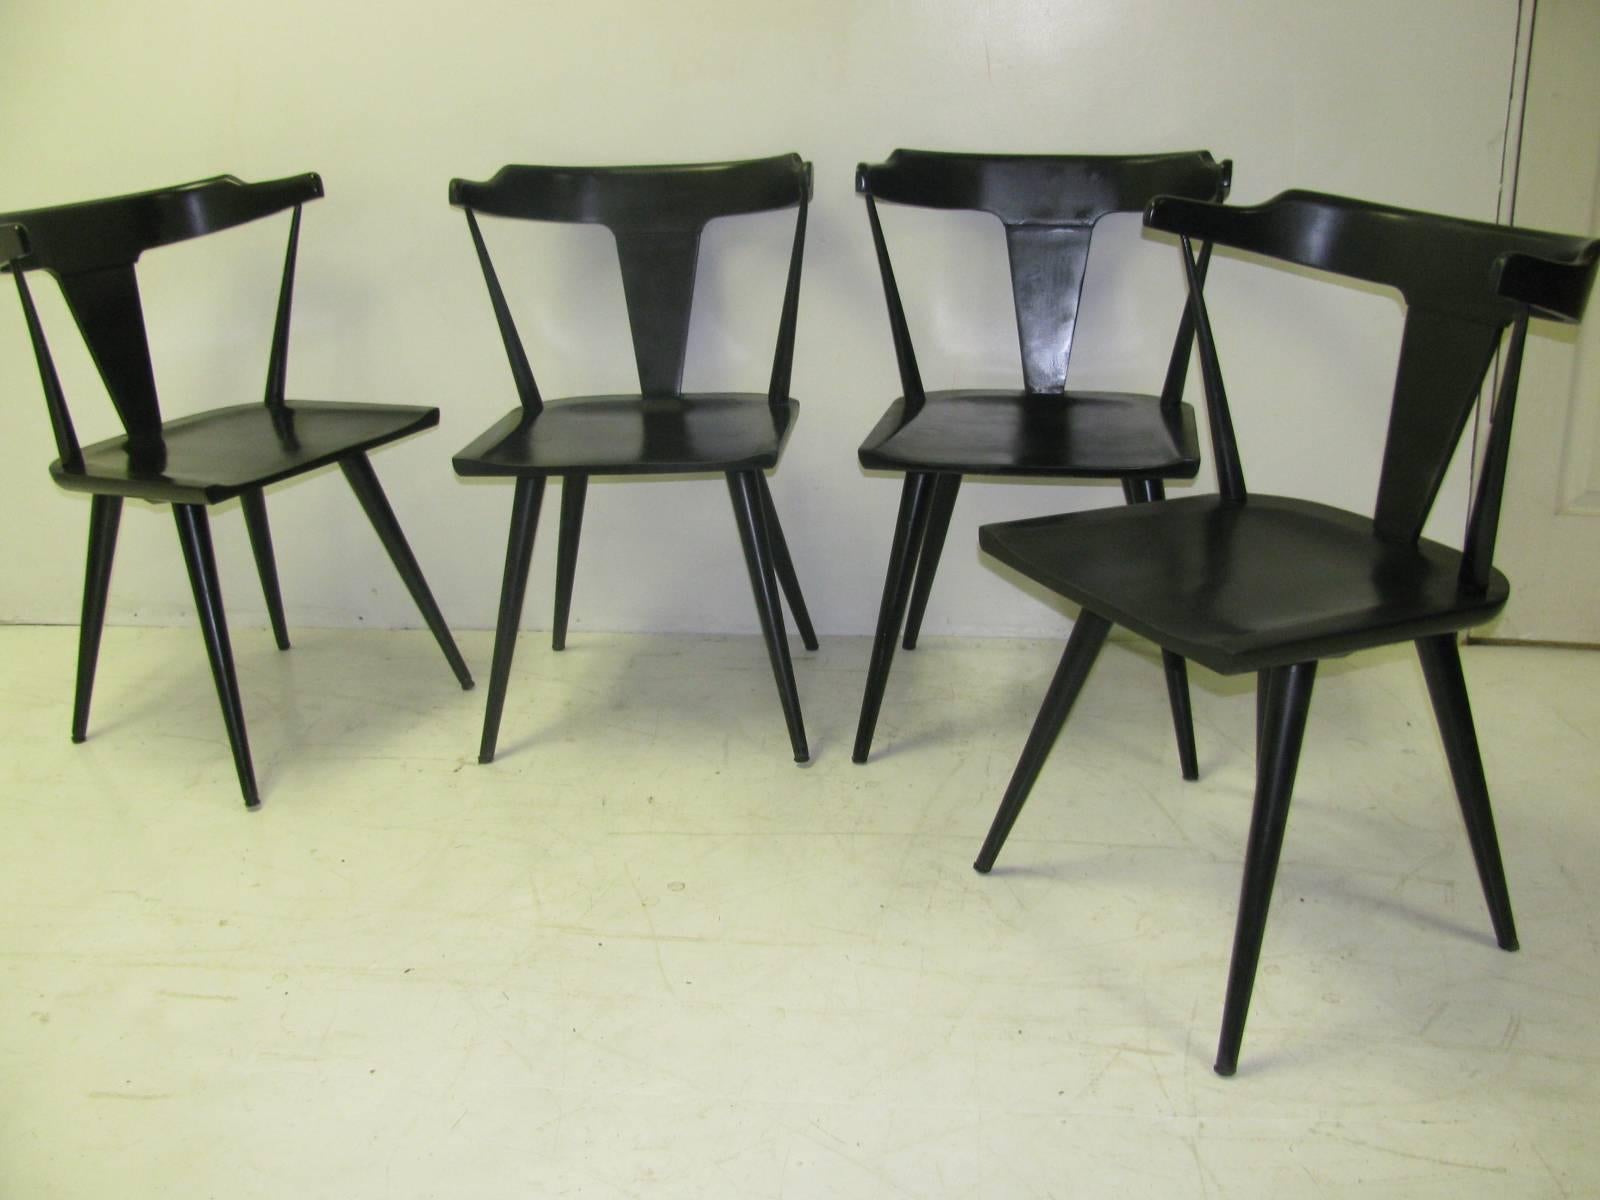 Enameled Mid-Century Modern Dining Chairs Planner Group by Paul McCobb